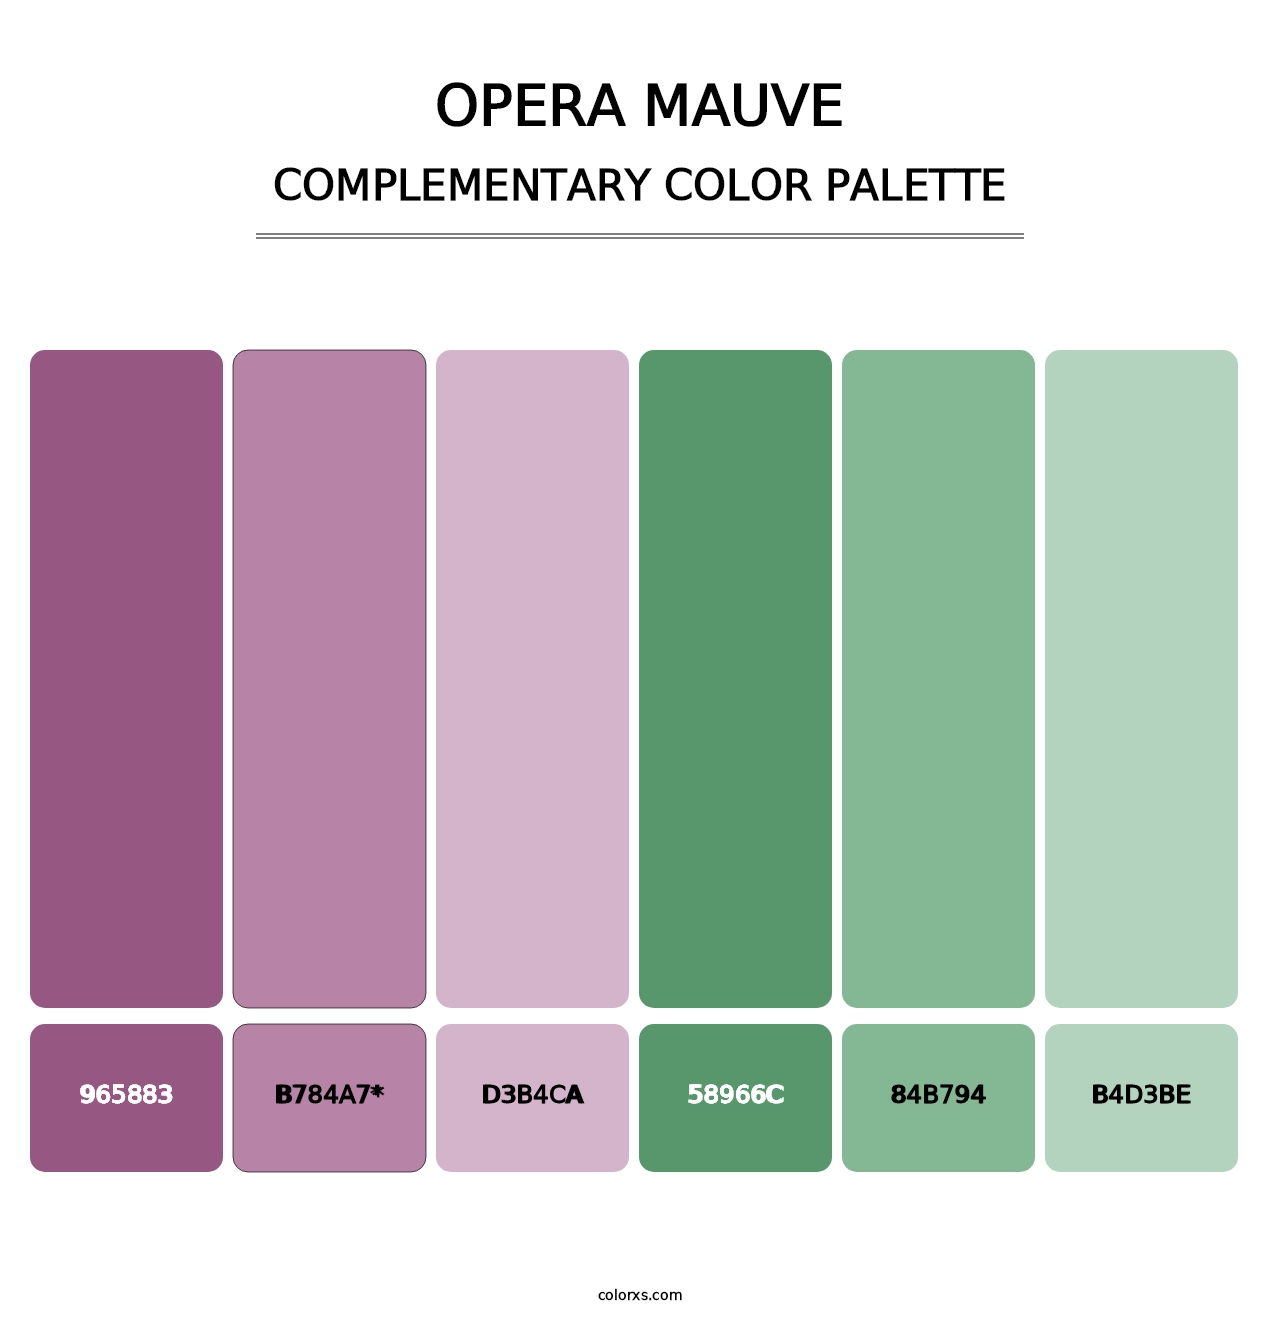 Opera Mauve - Complementary Color Palette